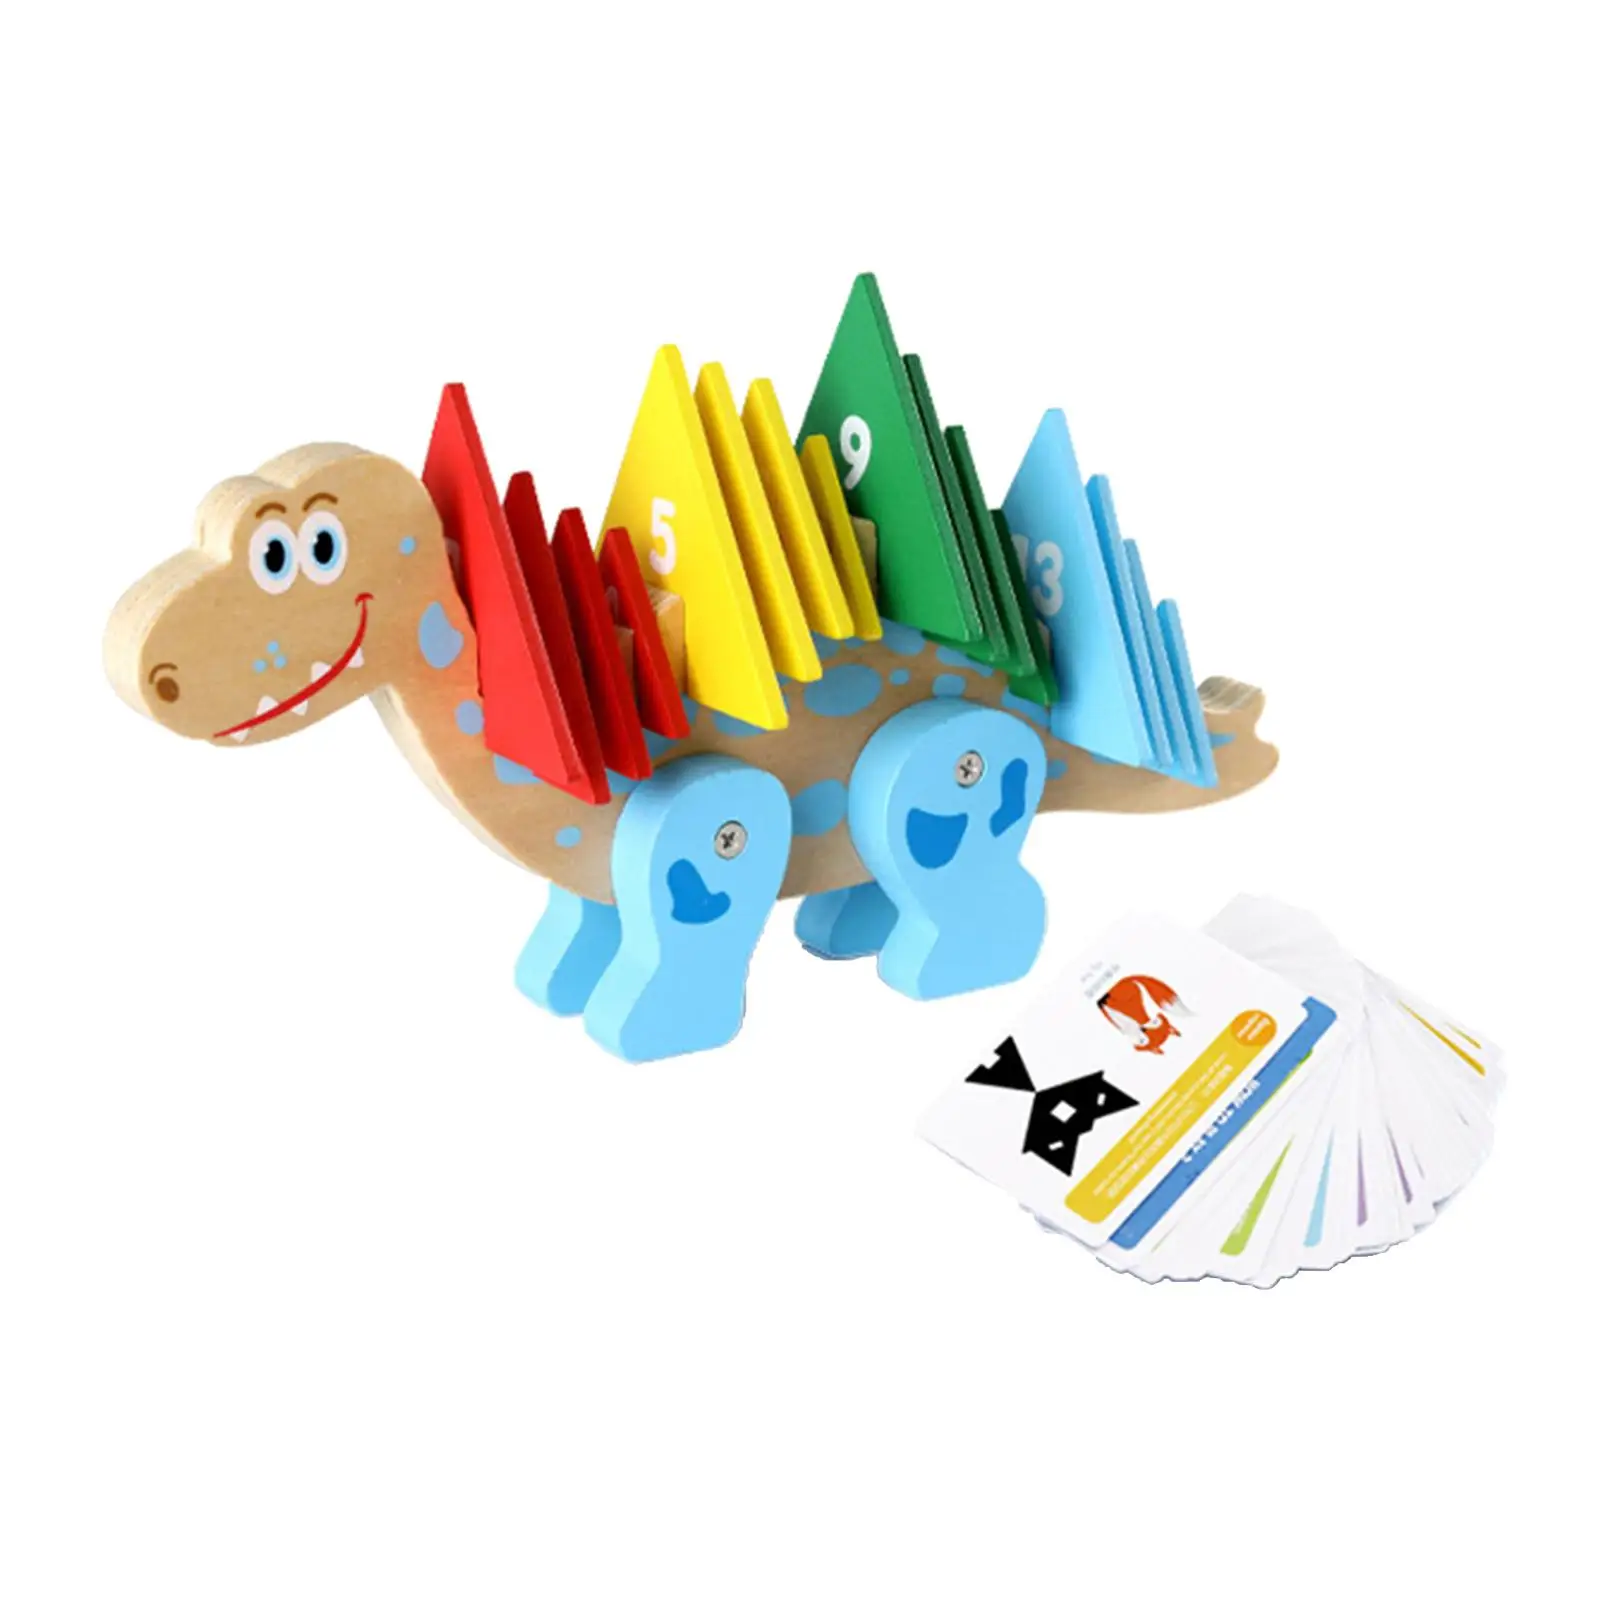 Kids Math Toy Find Developmental Toy Wooden Color Shape Recognition Dinosaur Toy Gift